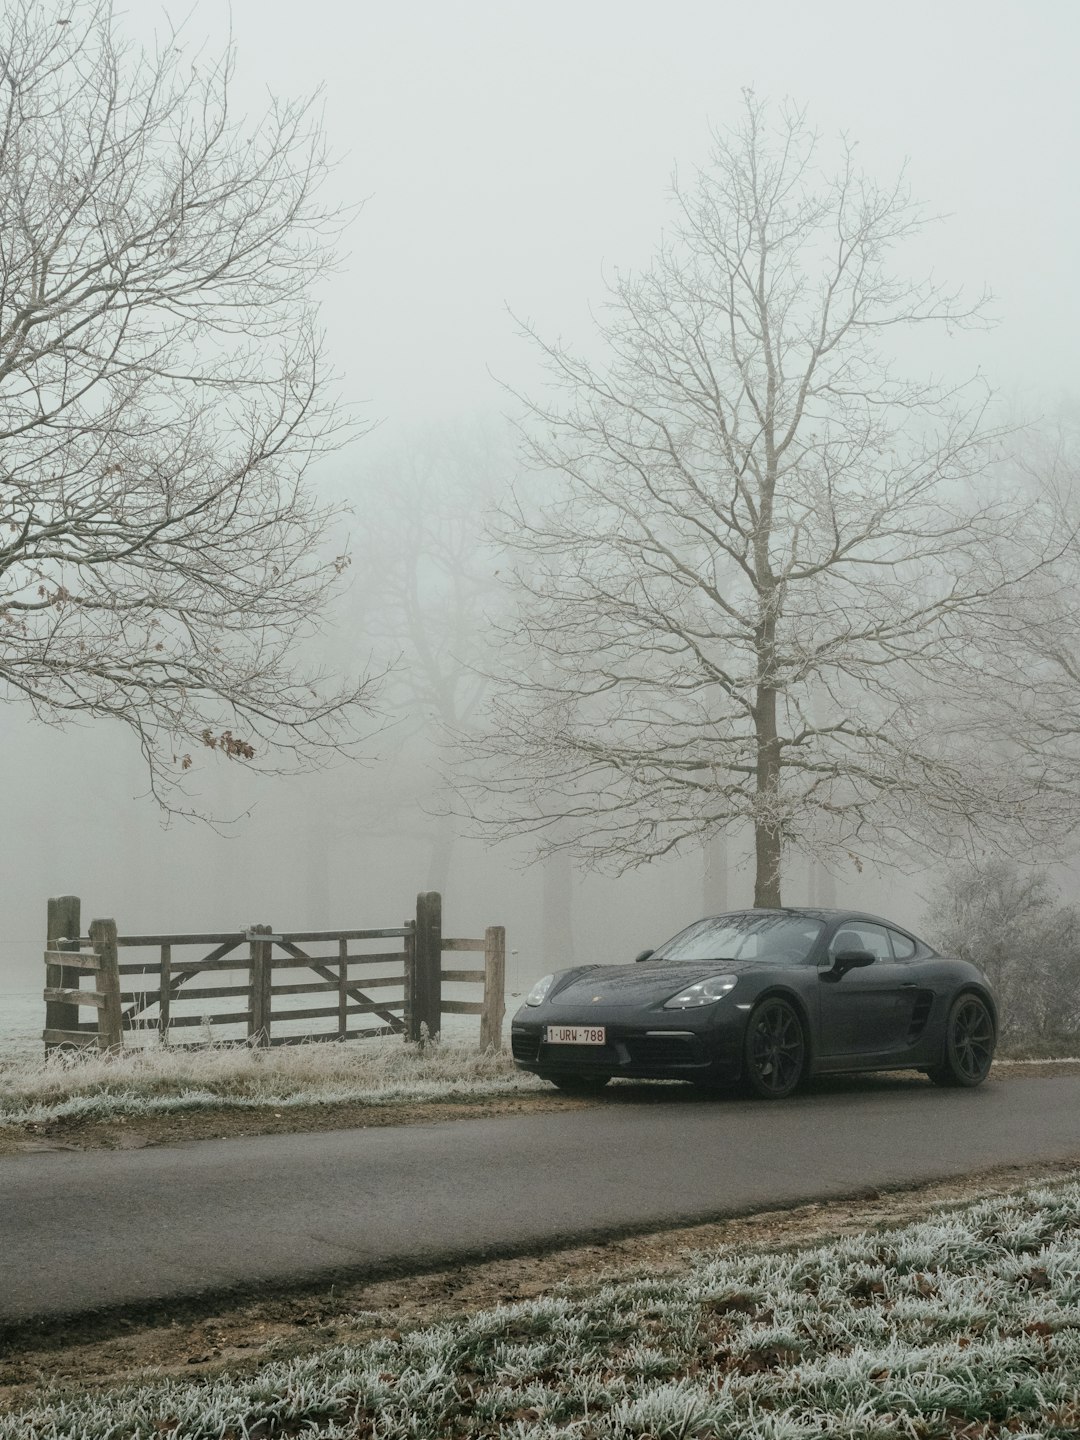 black sedan parked near brown wooden fence during foggy weather